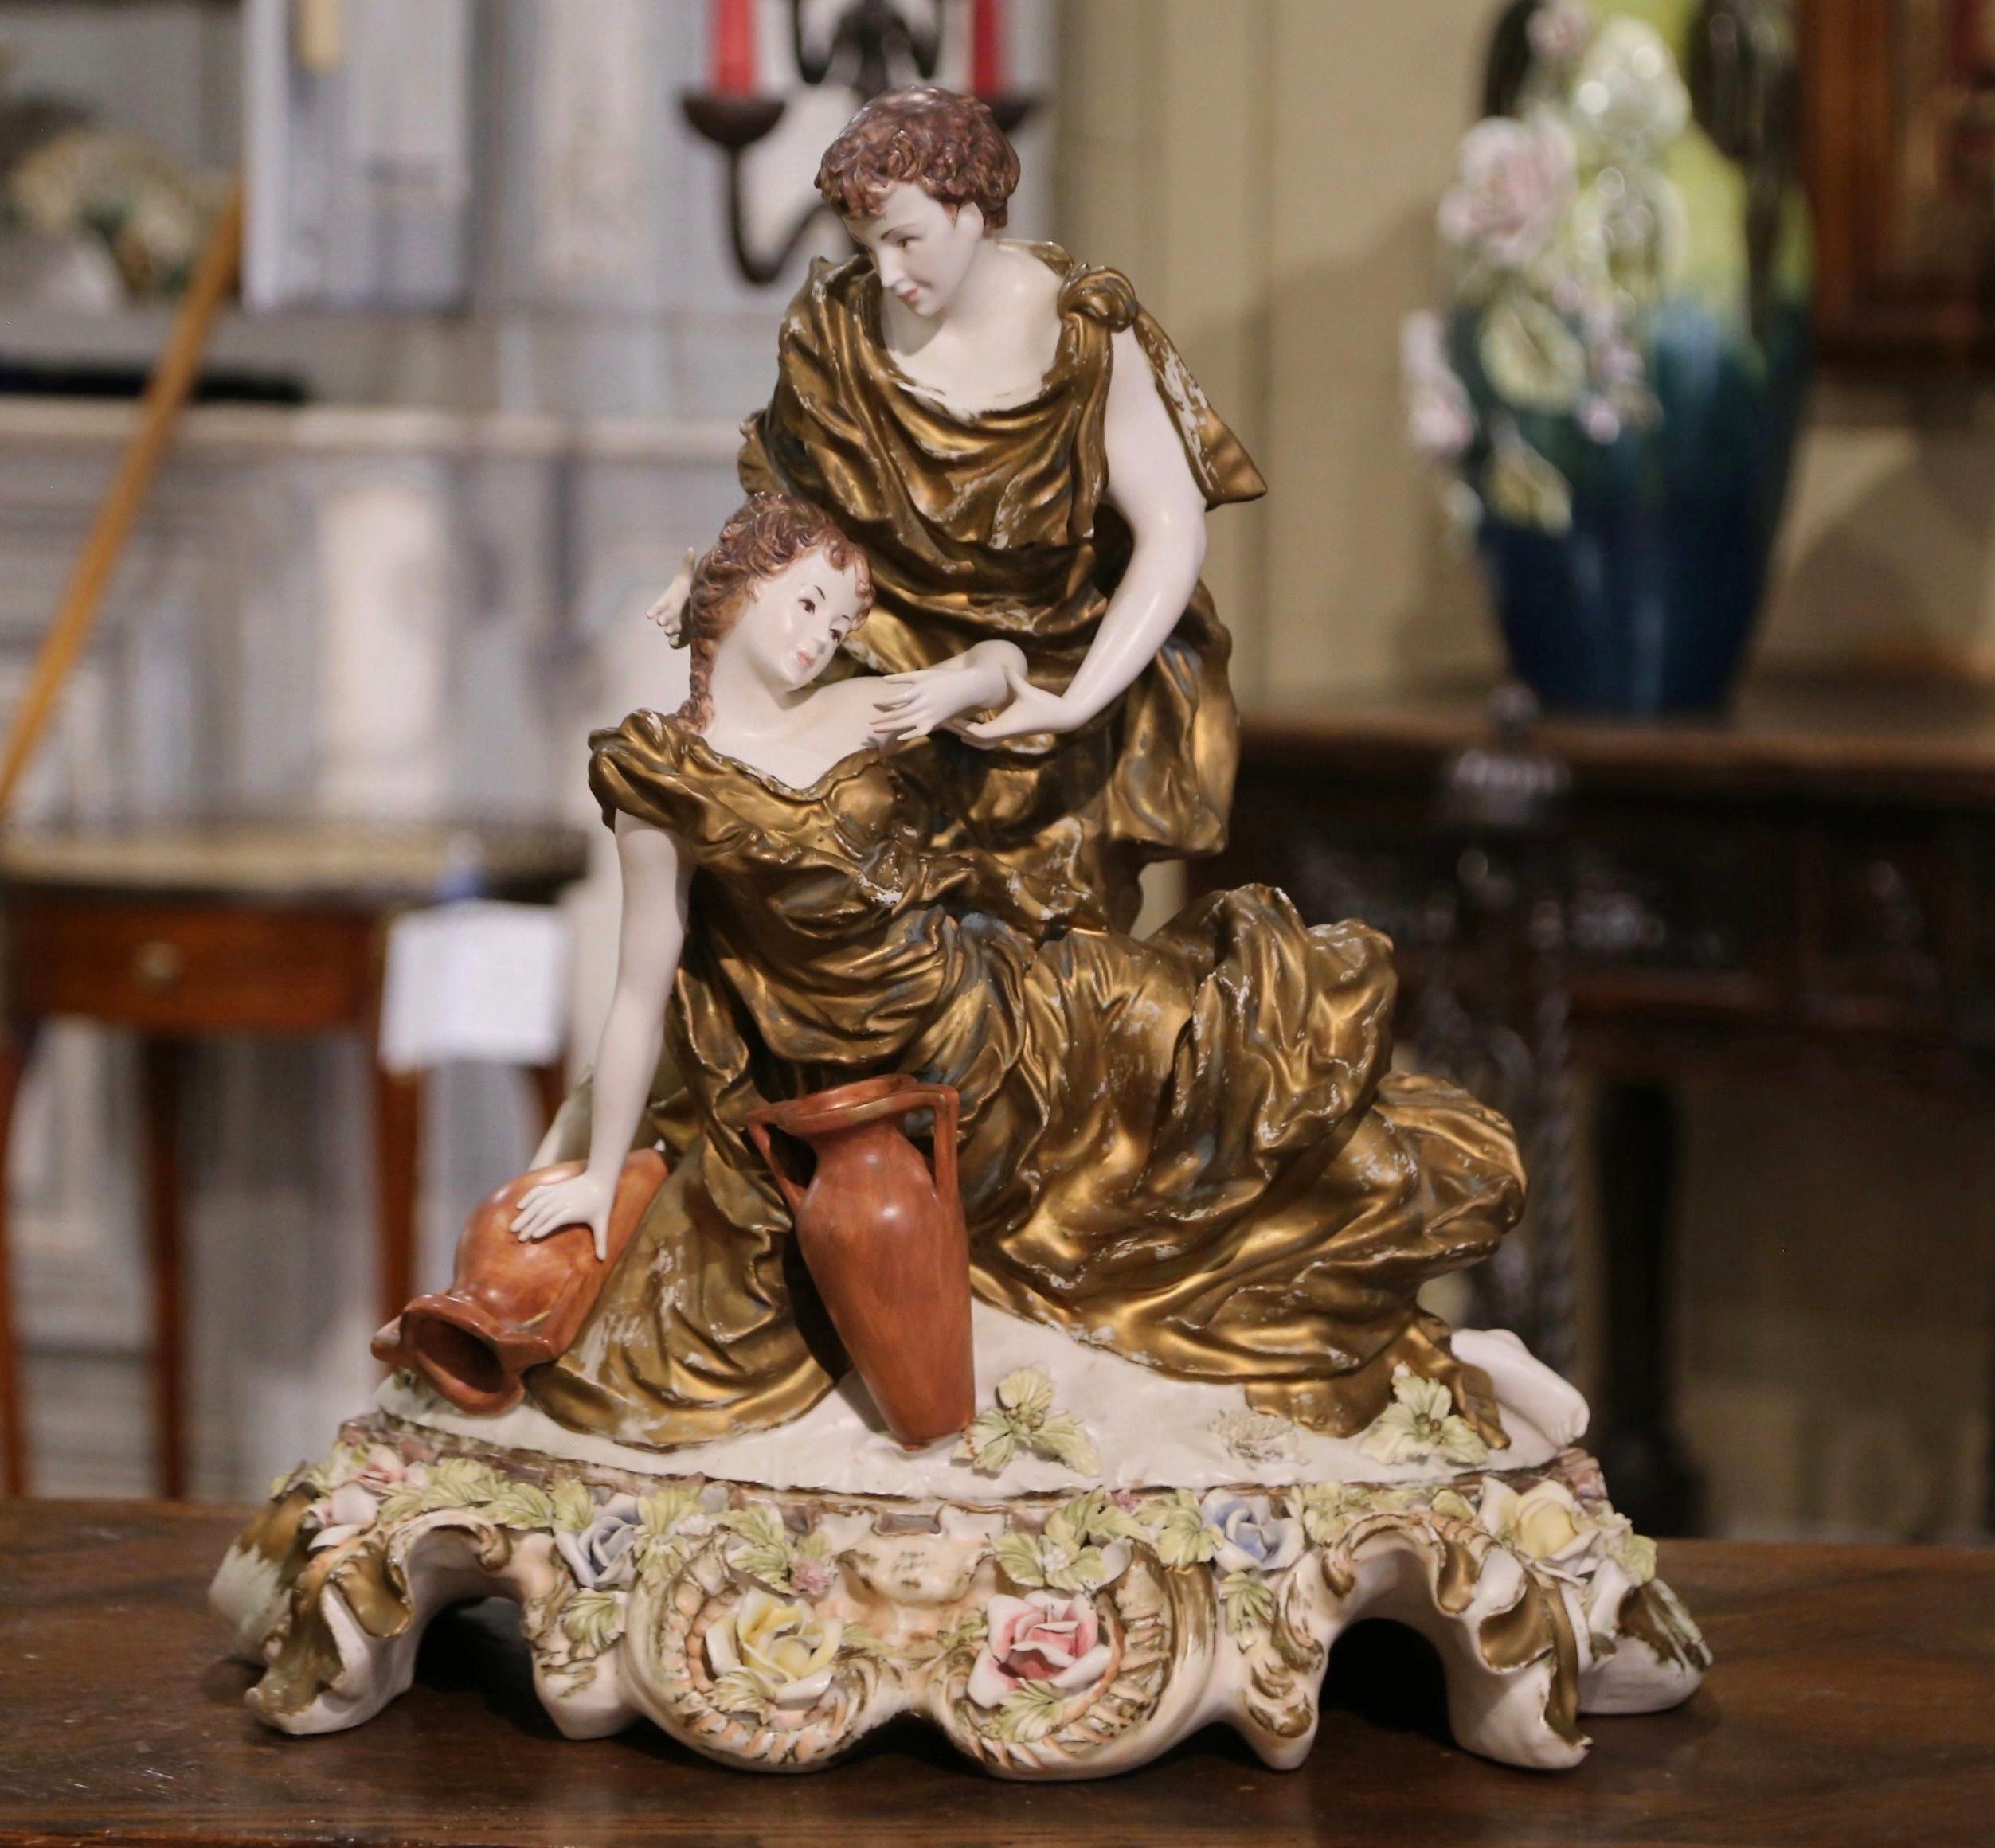 20th Century Italian Hand-Painted and Gilt Porcelain Capodimonte Figurine Statue In Excellent Condition For Sale In Dallas, TX